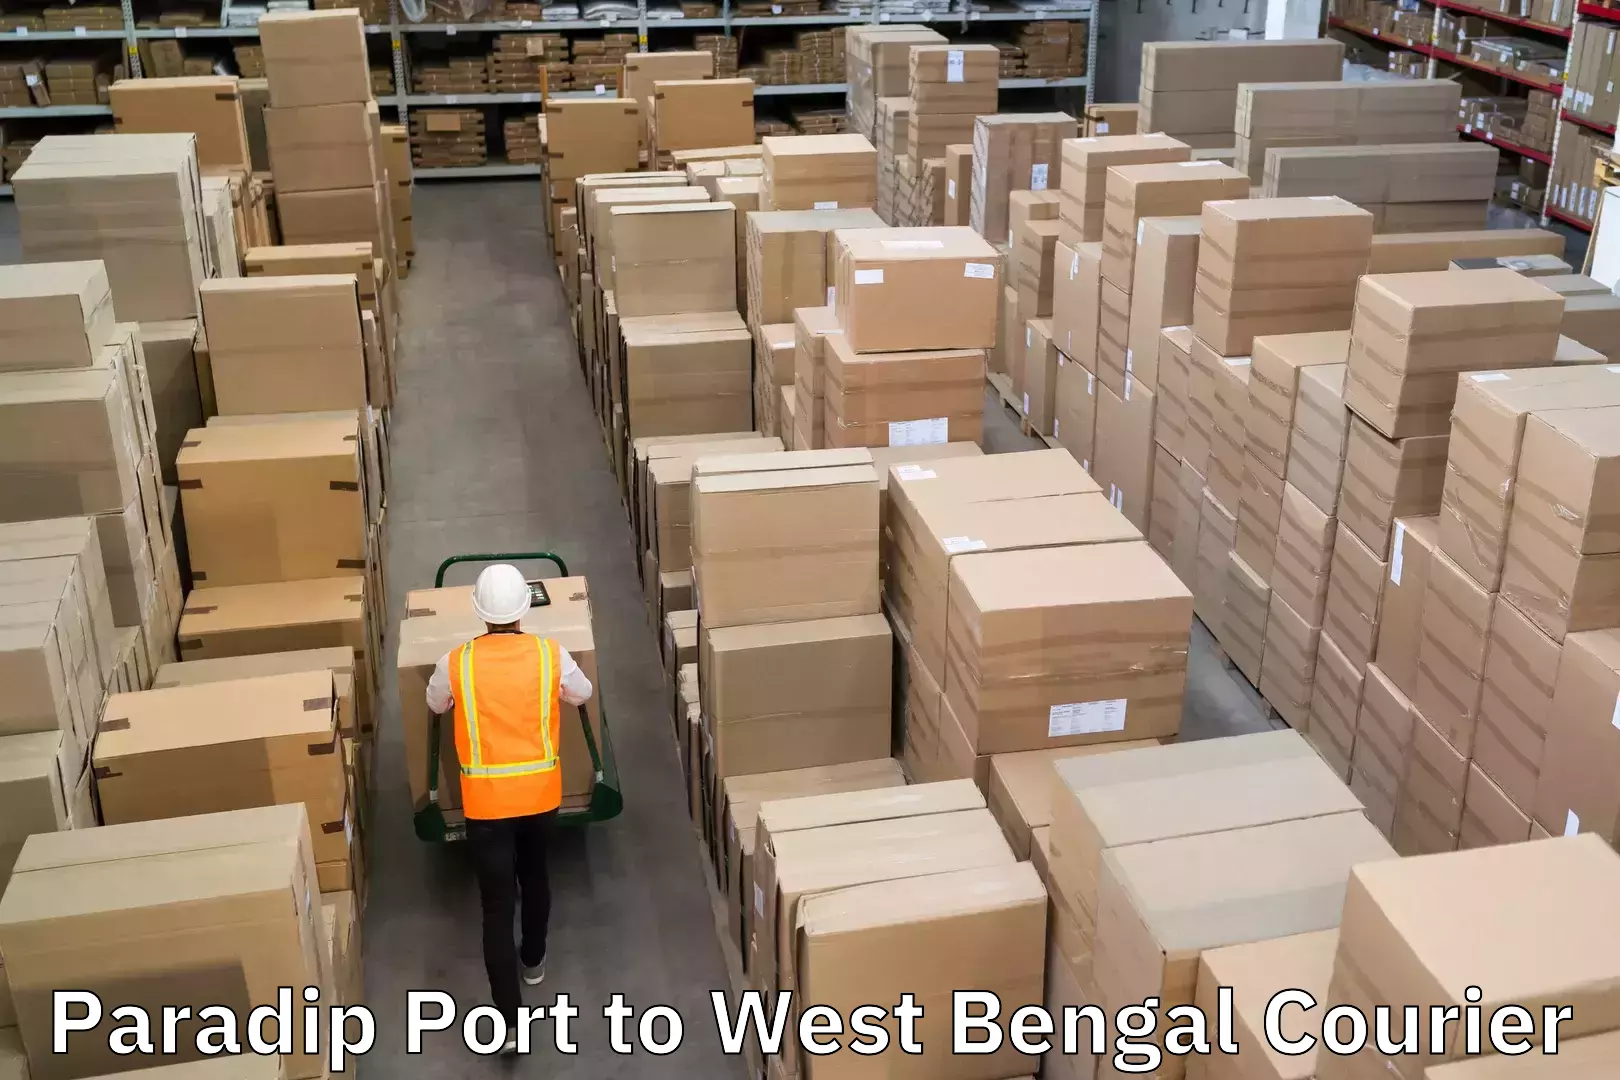 Global shipping solutions in Paradip Port to West Bengal